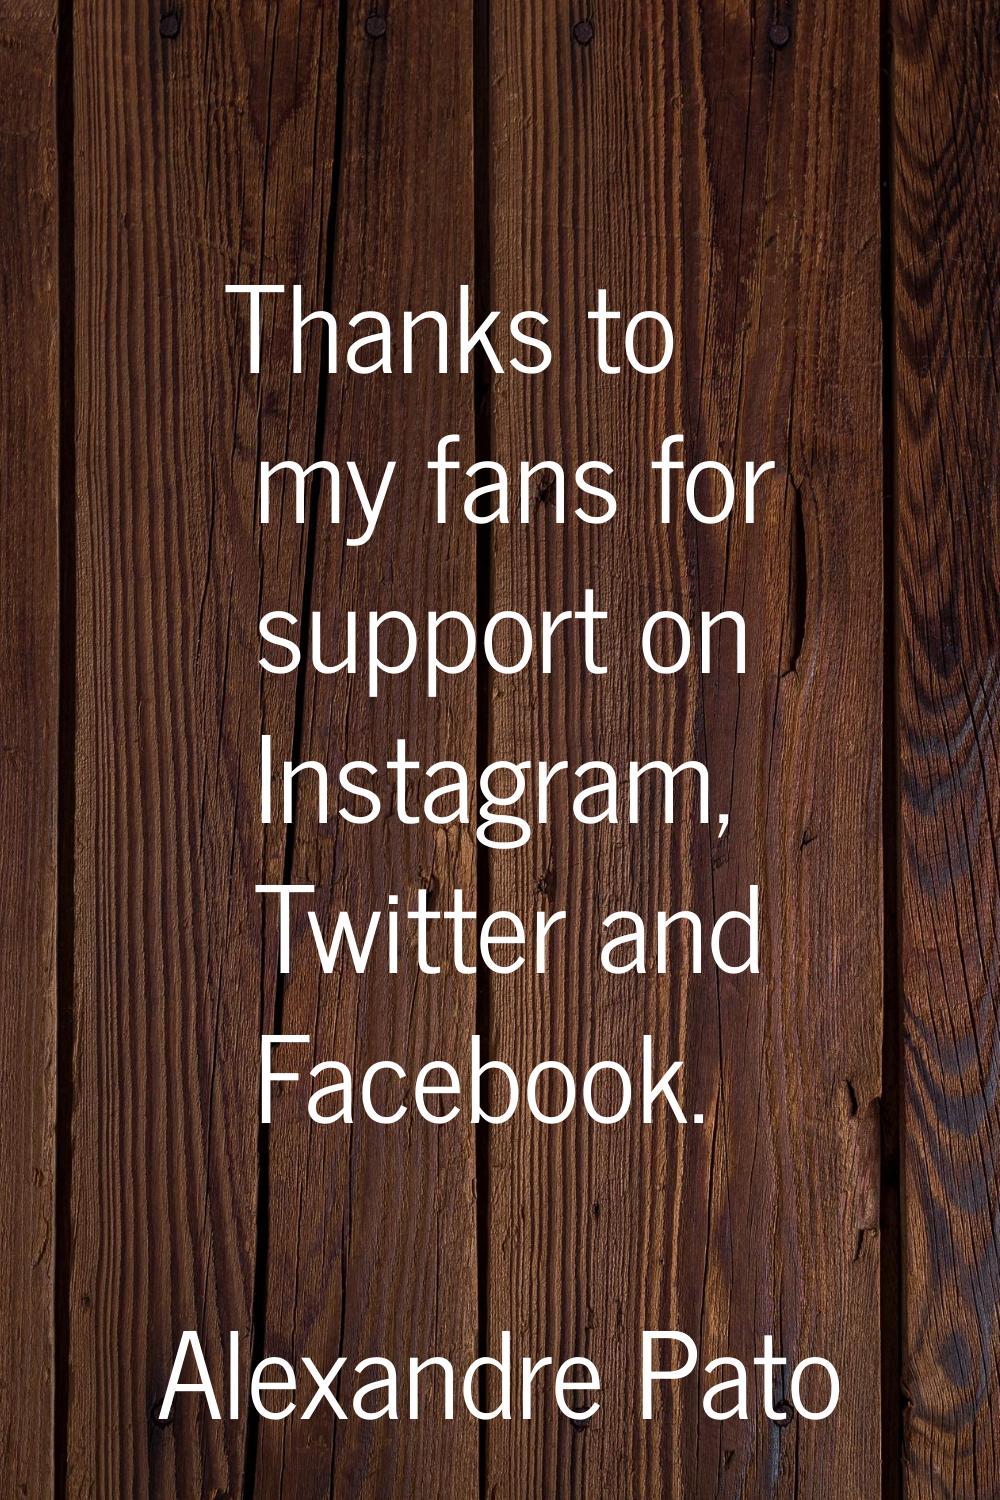 Thanks to my fans for support on Instagram, Twitter and Facebook.